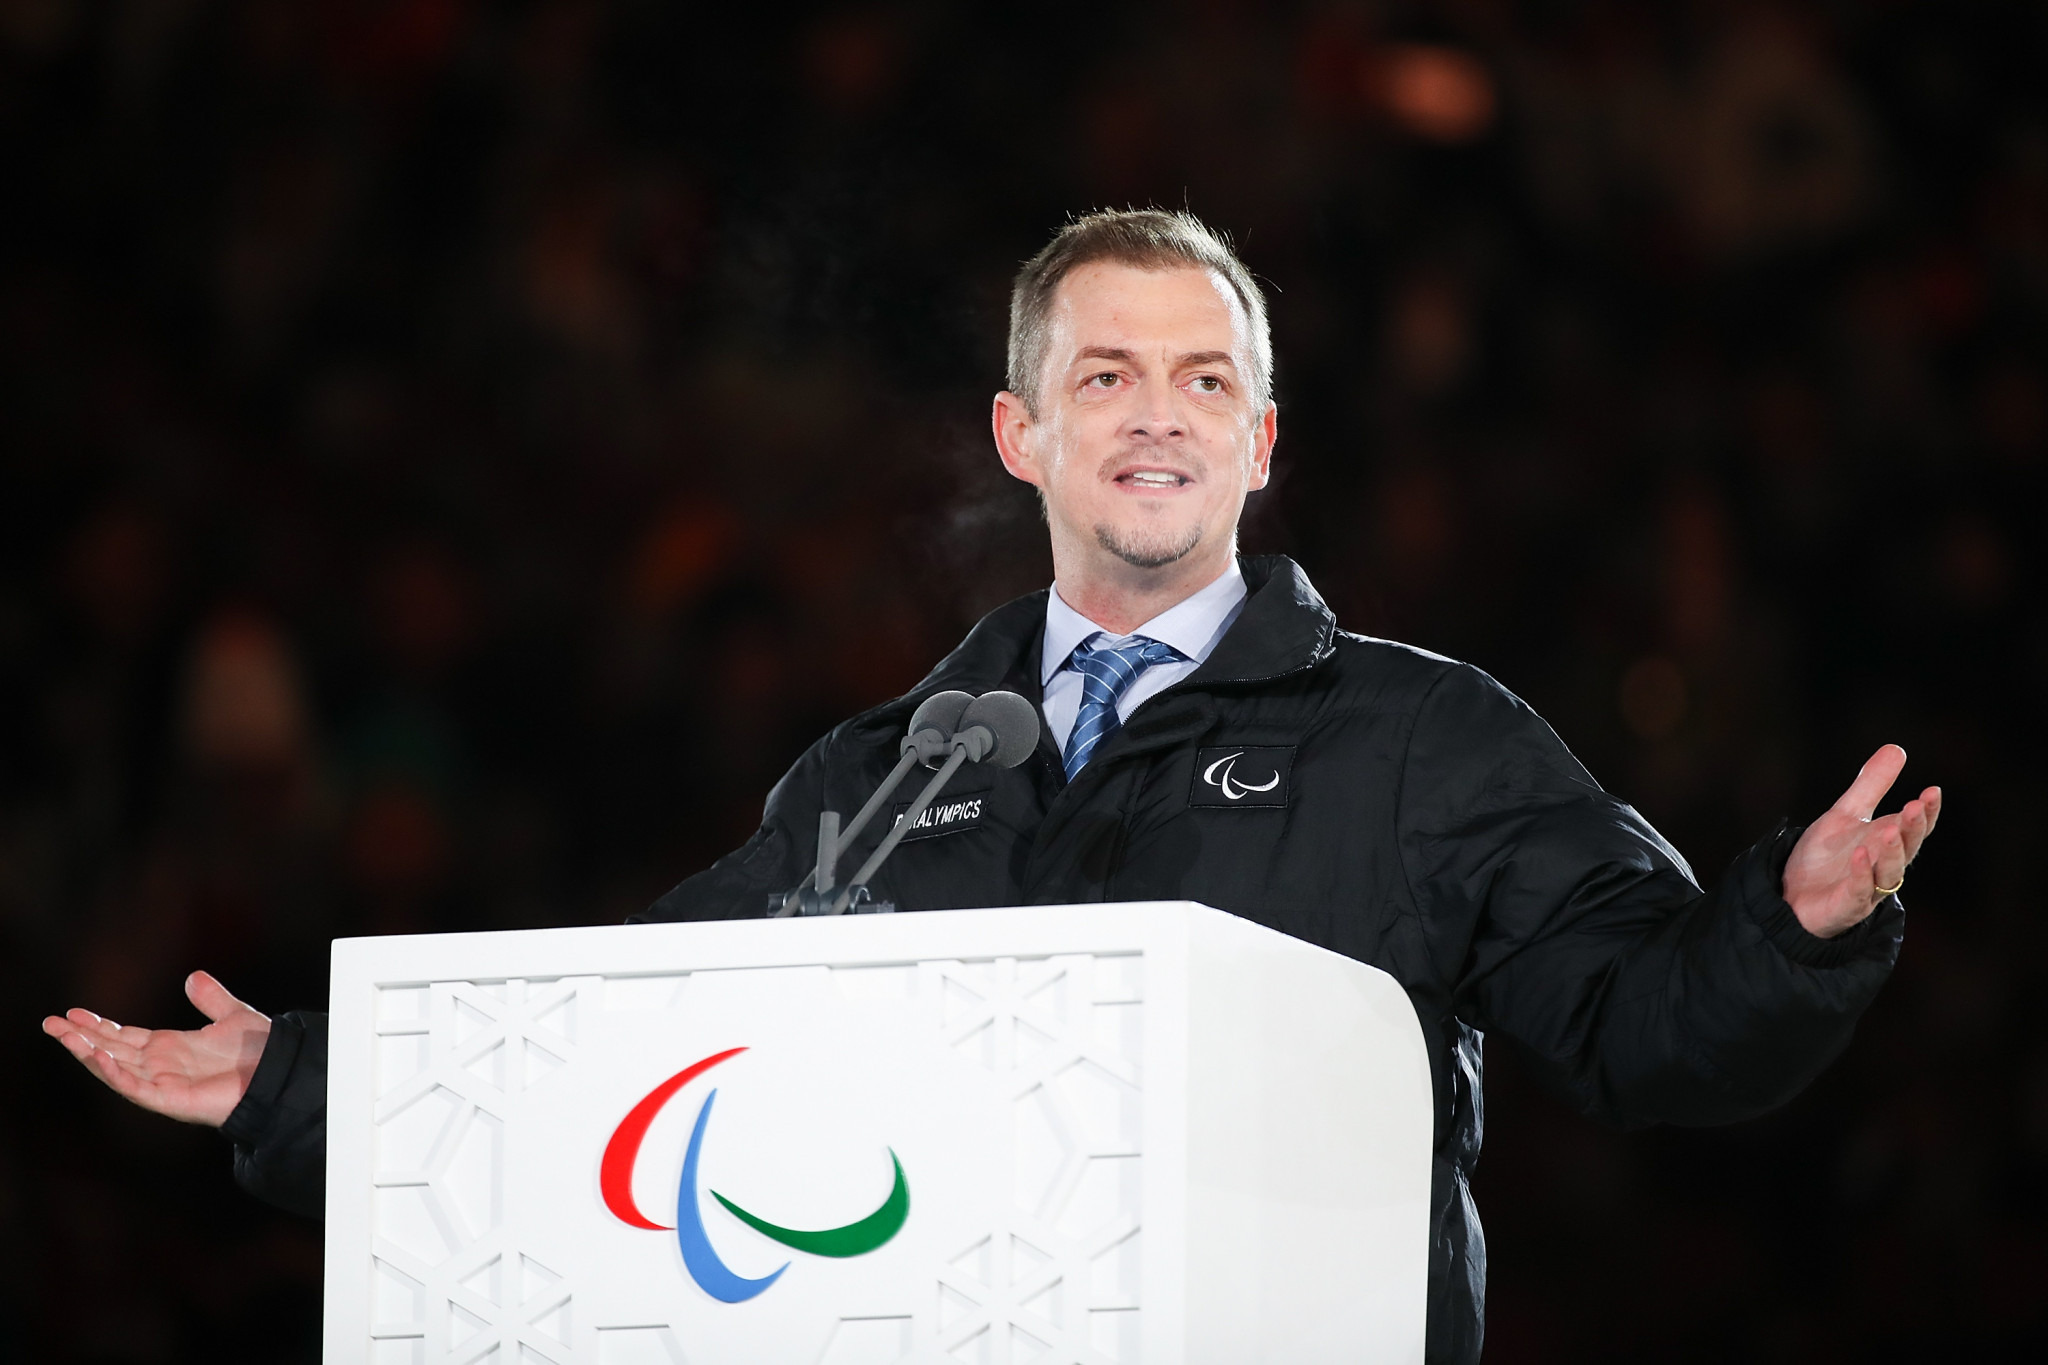 Andrew Parsons enjoyed his first Paralympic Games as IPC President ©Getty Images